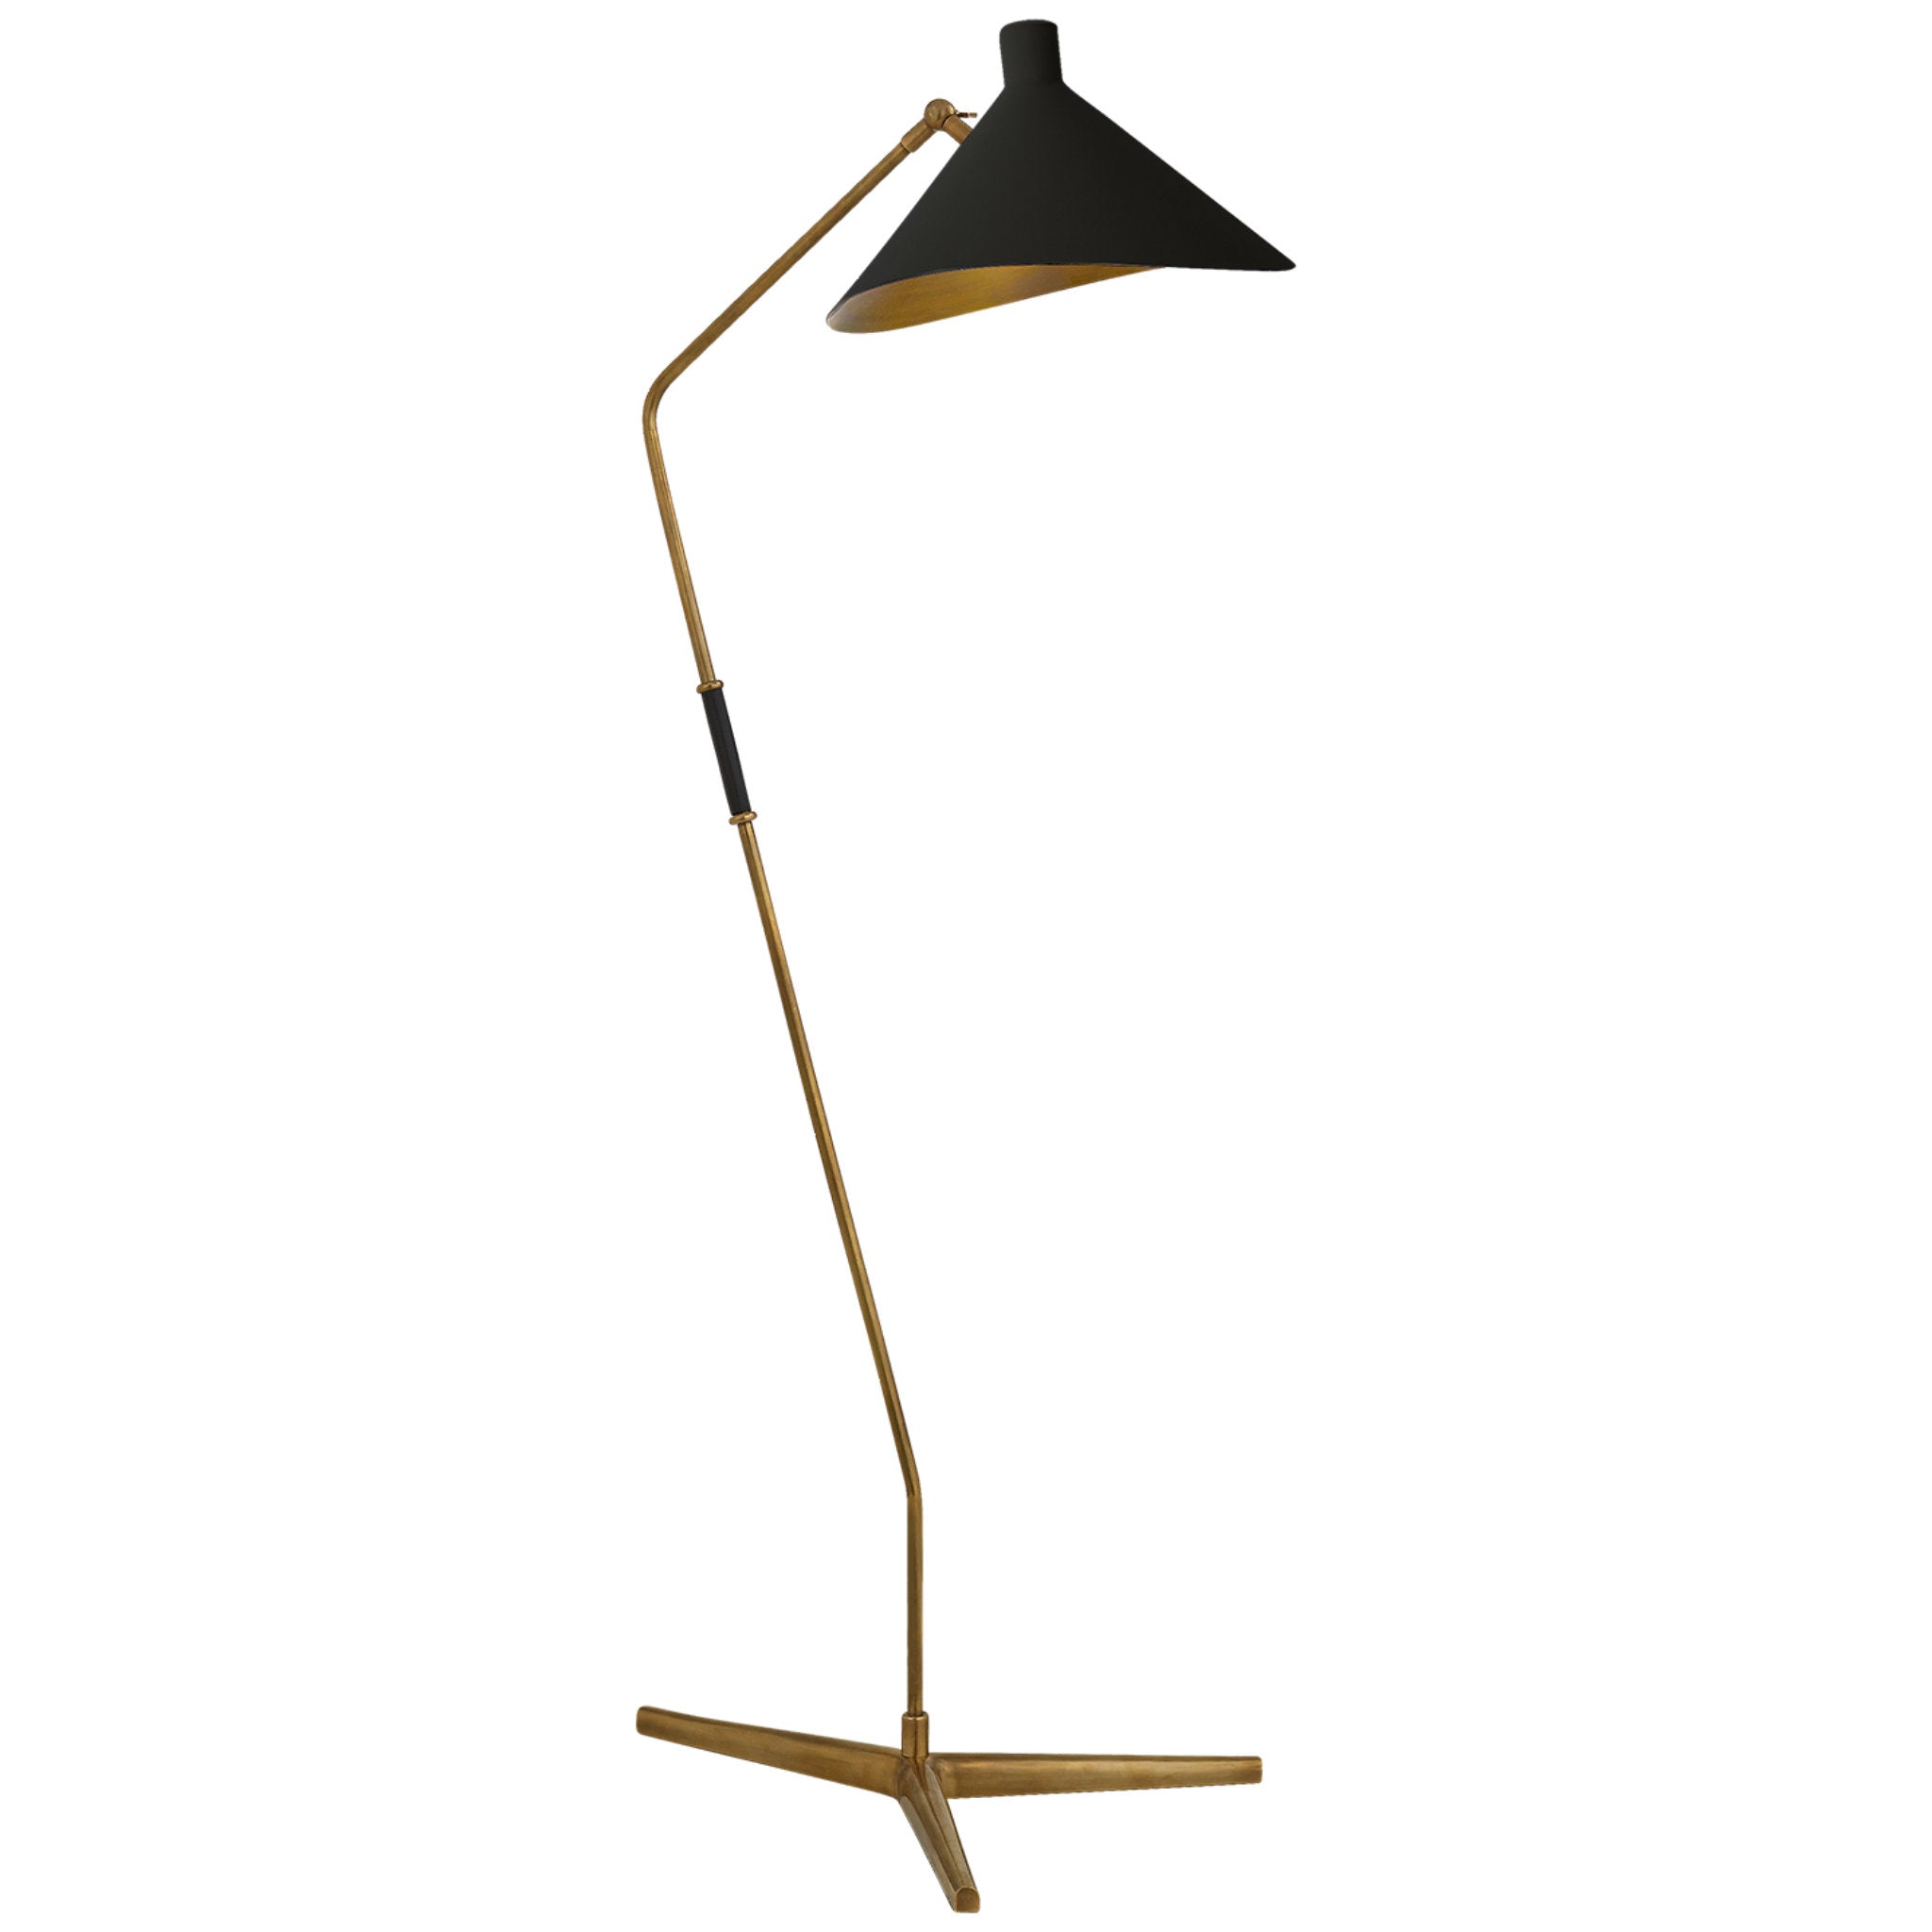 AERIN Mayotte Large Offset Floor Lamp in Hand-Rubbed Antique Brass with Black Shade